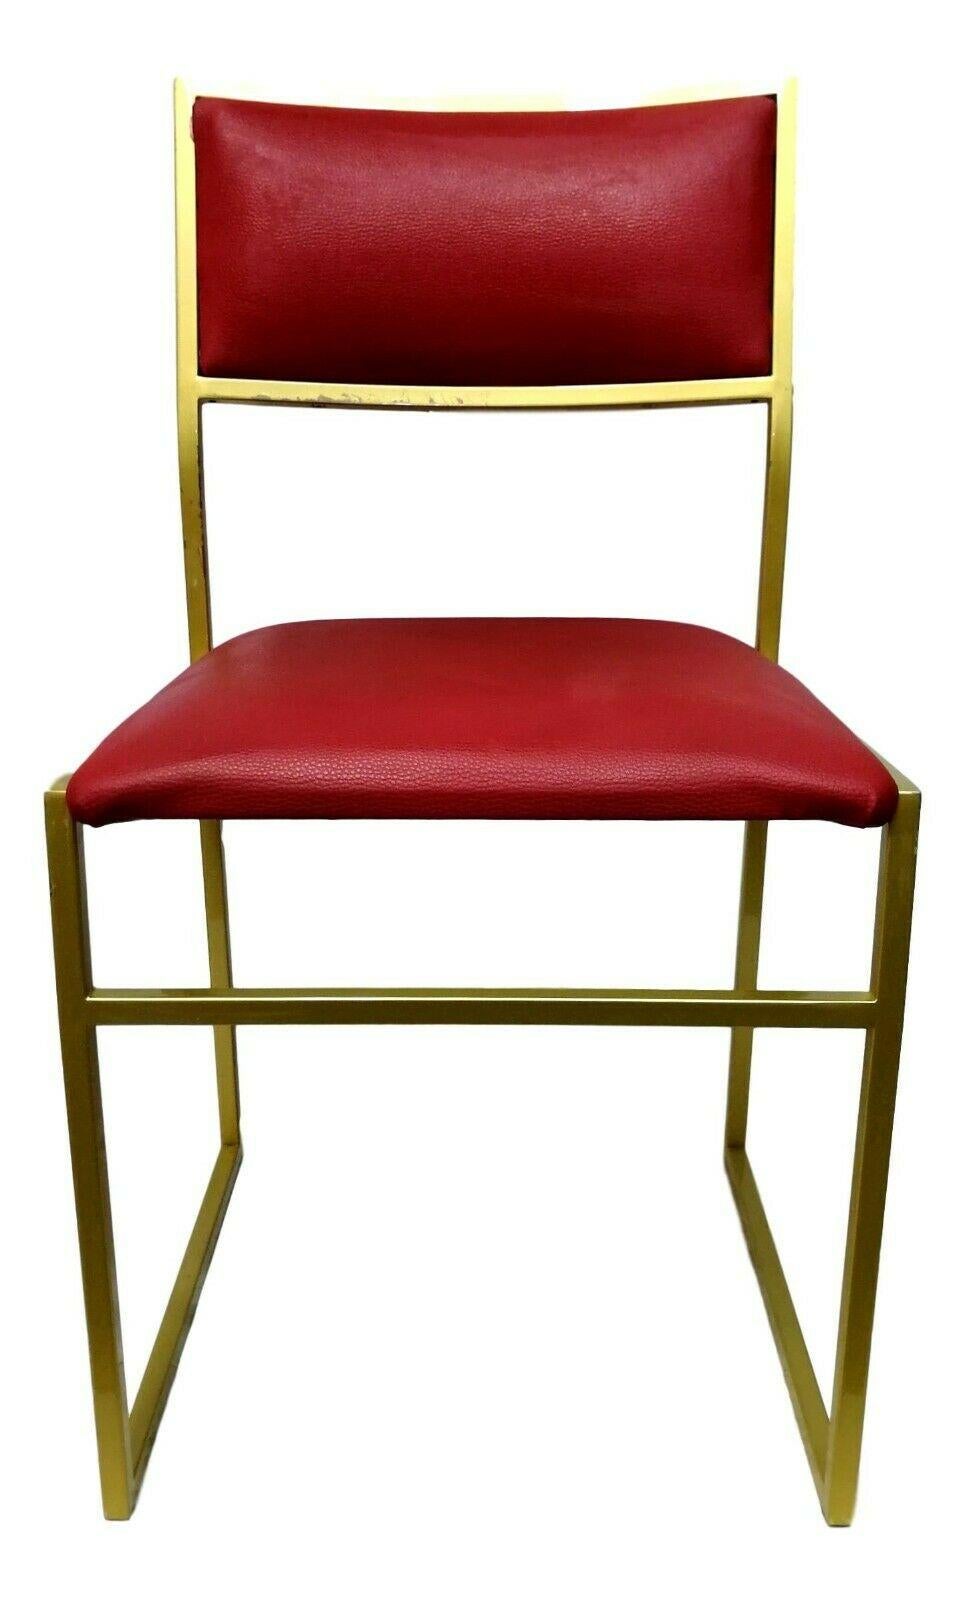 Collectible Chair in Gold Metal and Burgundy Upholstery, 1970s For Sale 1